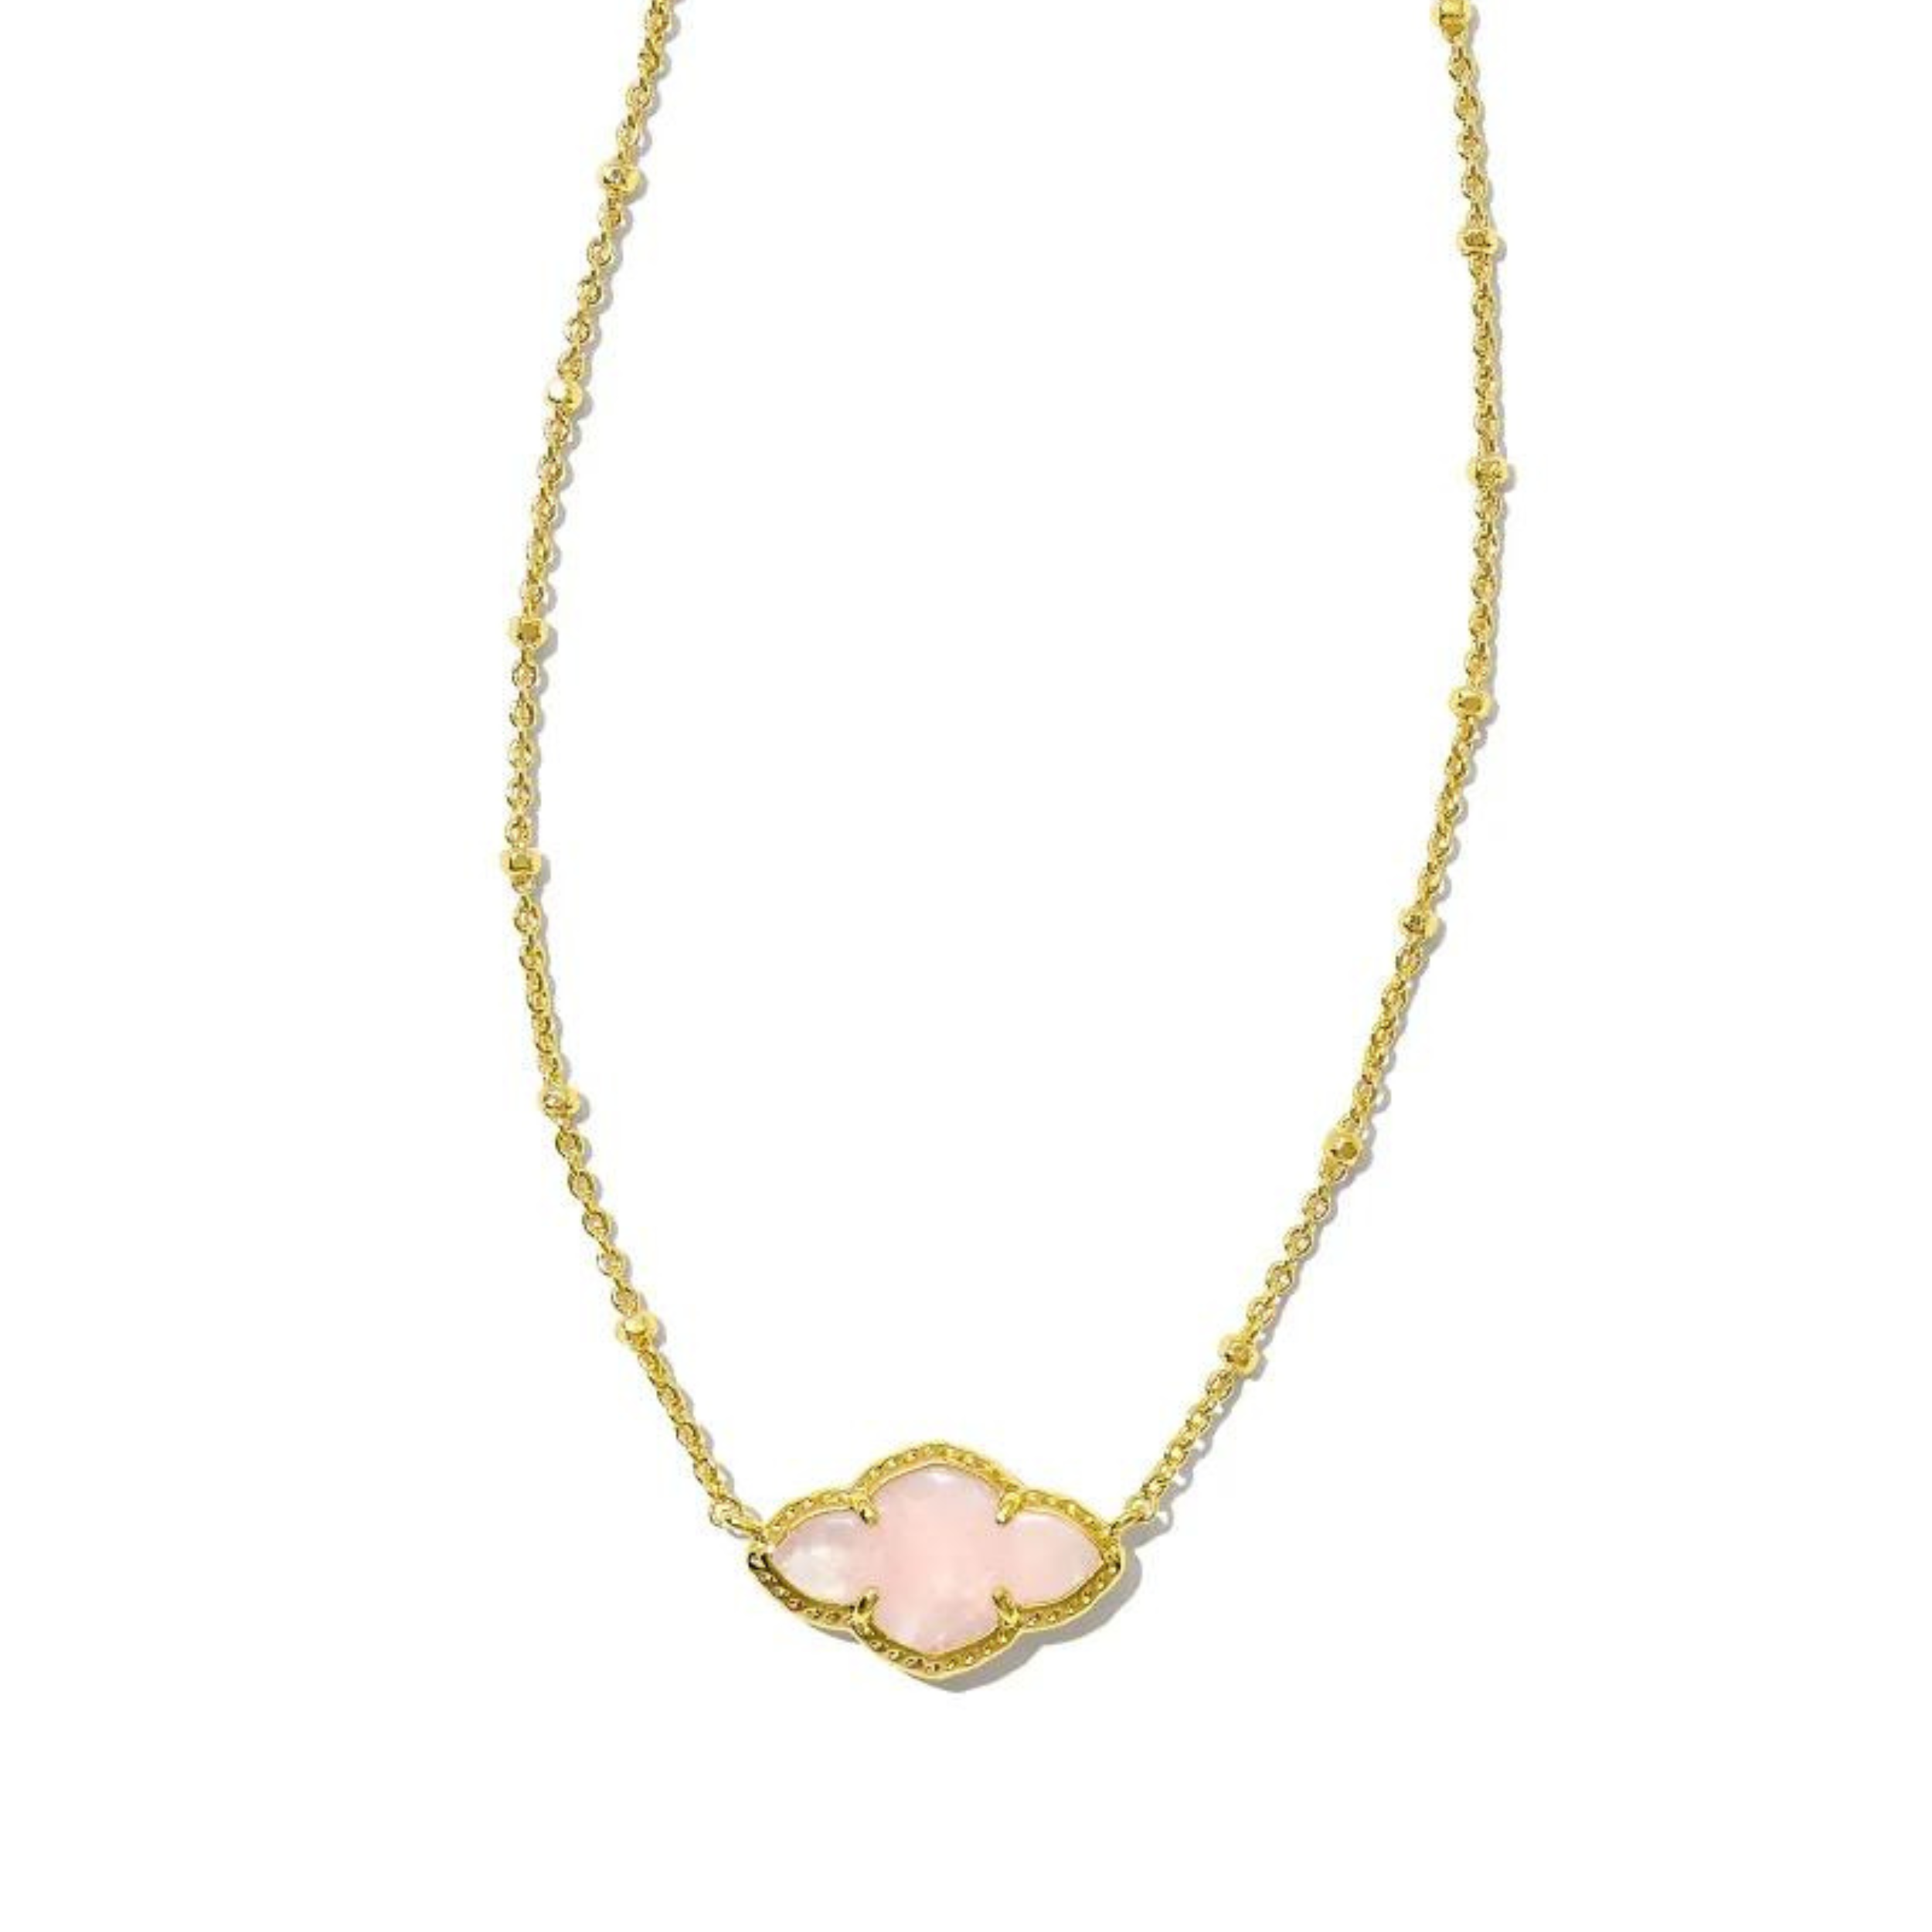 Gold necklace with a quatrefoil pendant with a rose quartz stone, pictured on a white bacground.